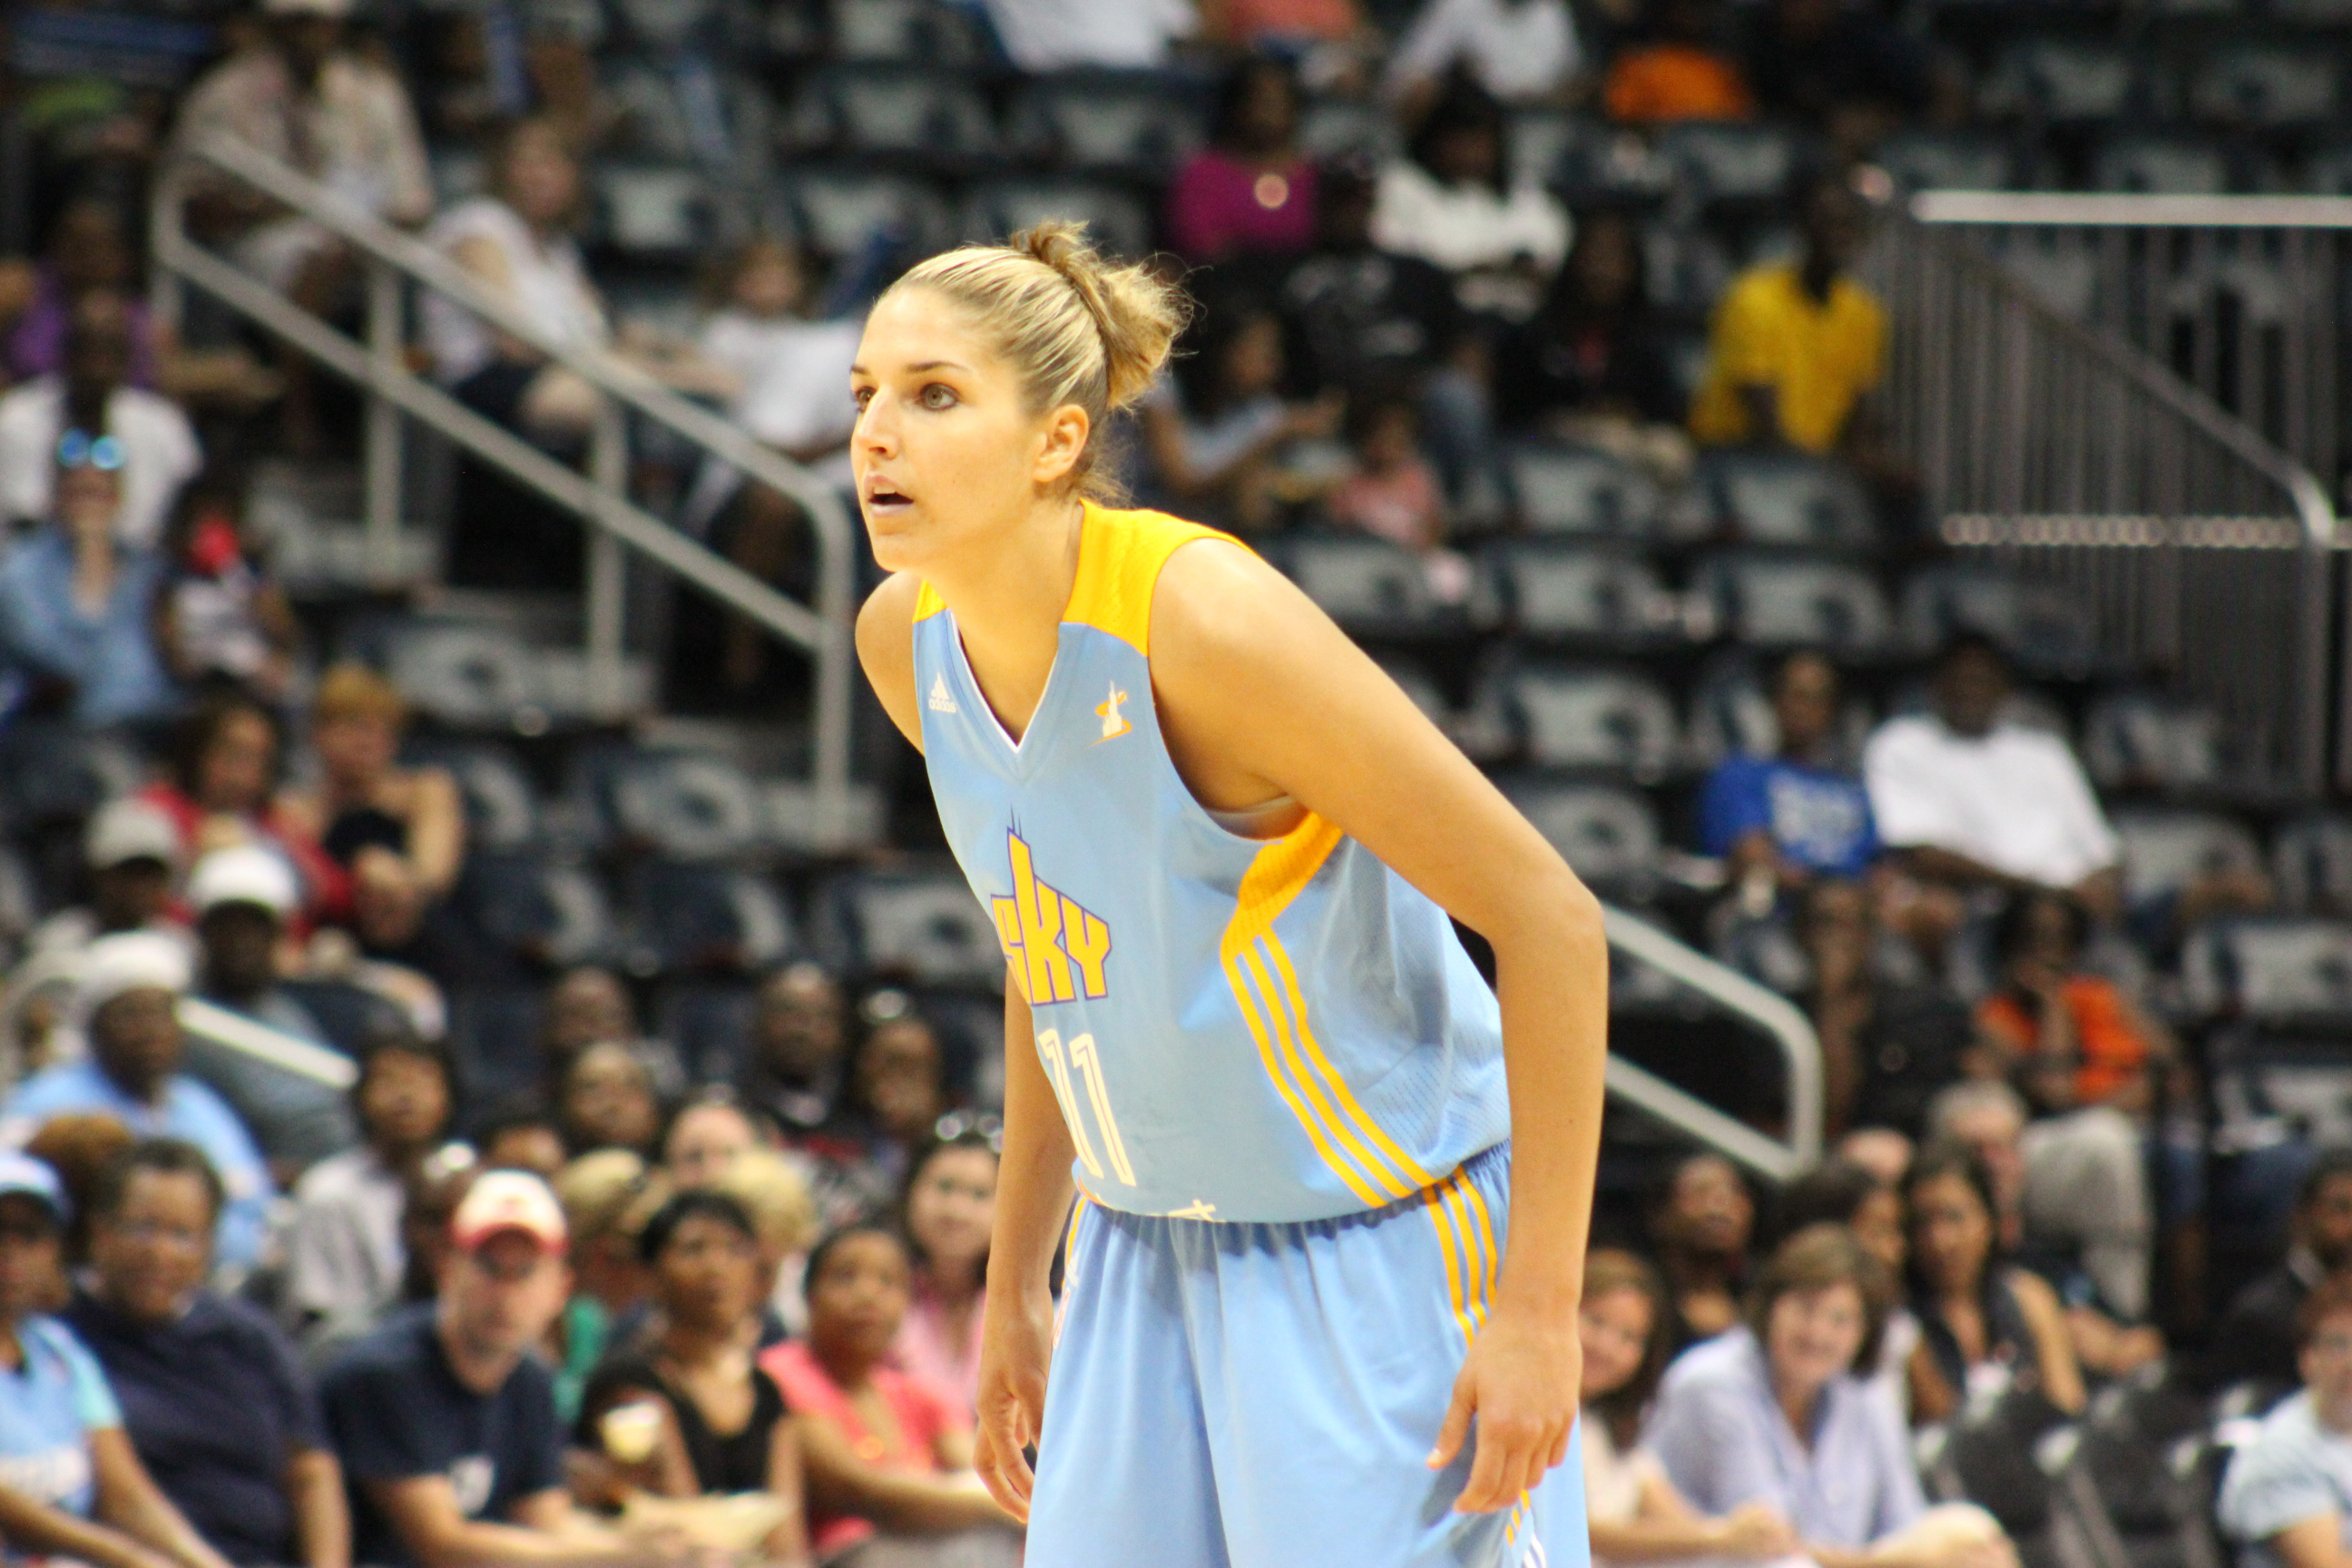 Elena Delle Donne, the Women’s National Basketball Association (WNBA)/Chicago Sky player, who is coming off one of the best rookie debuts in WNBA history.